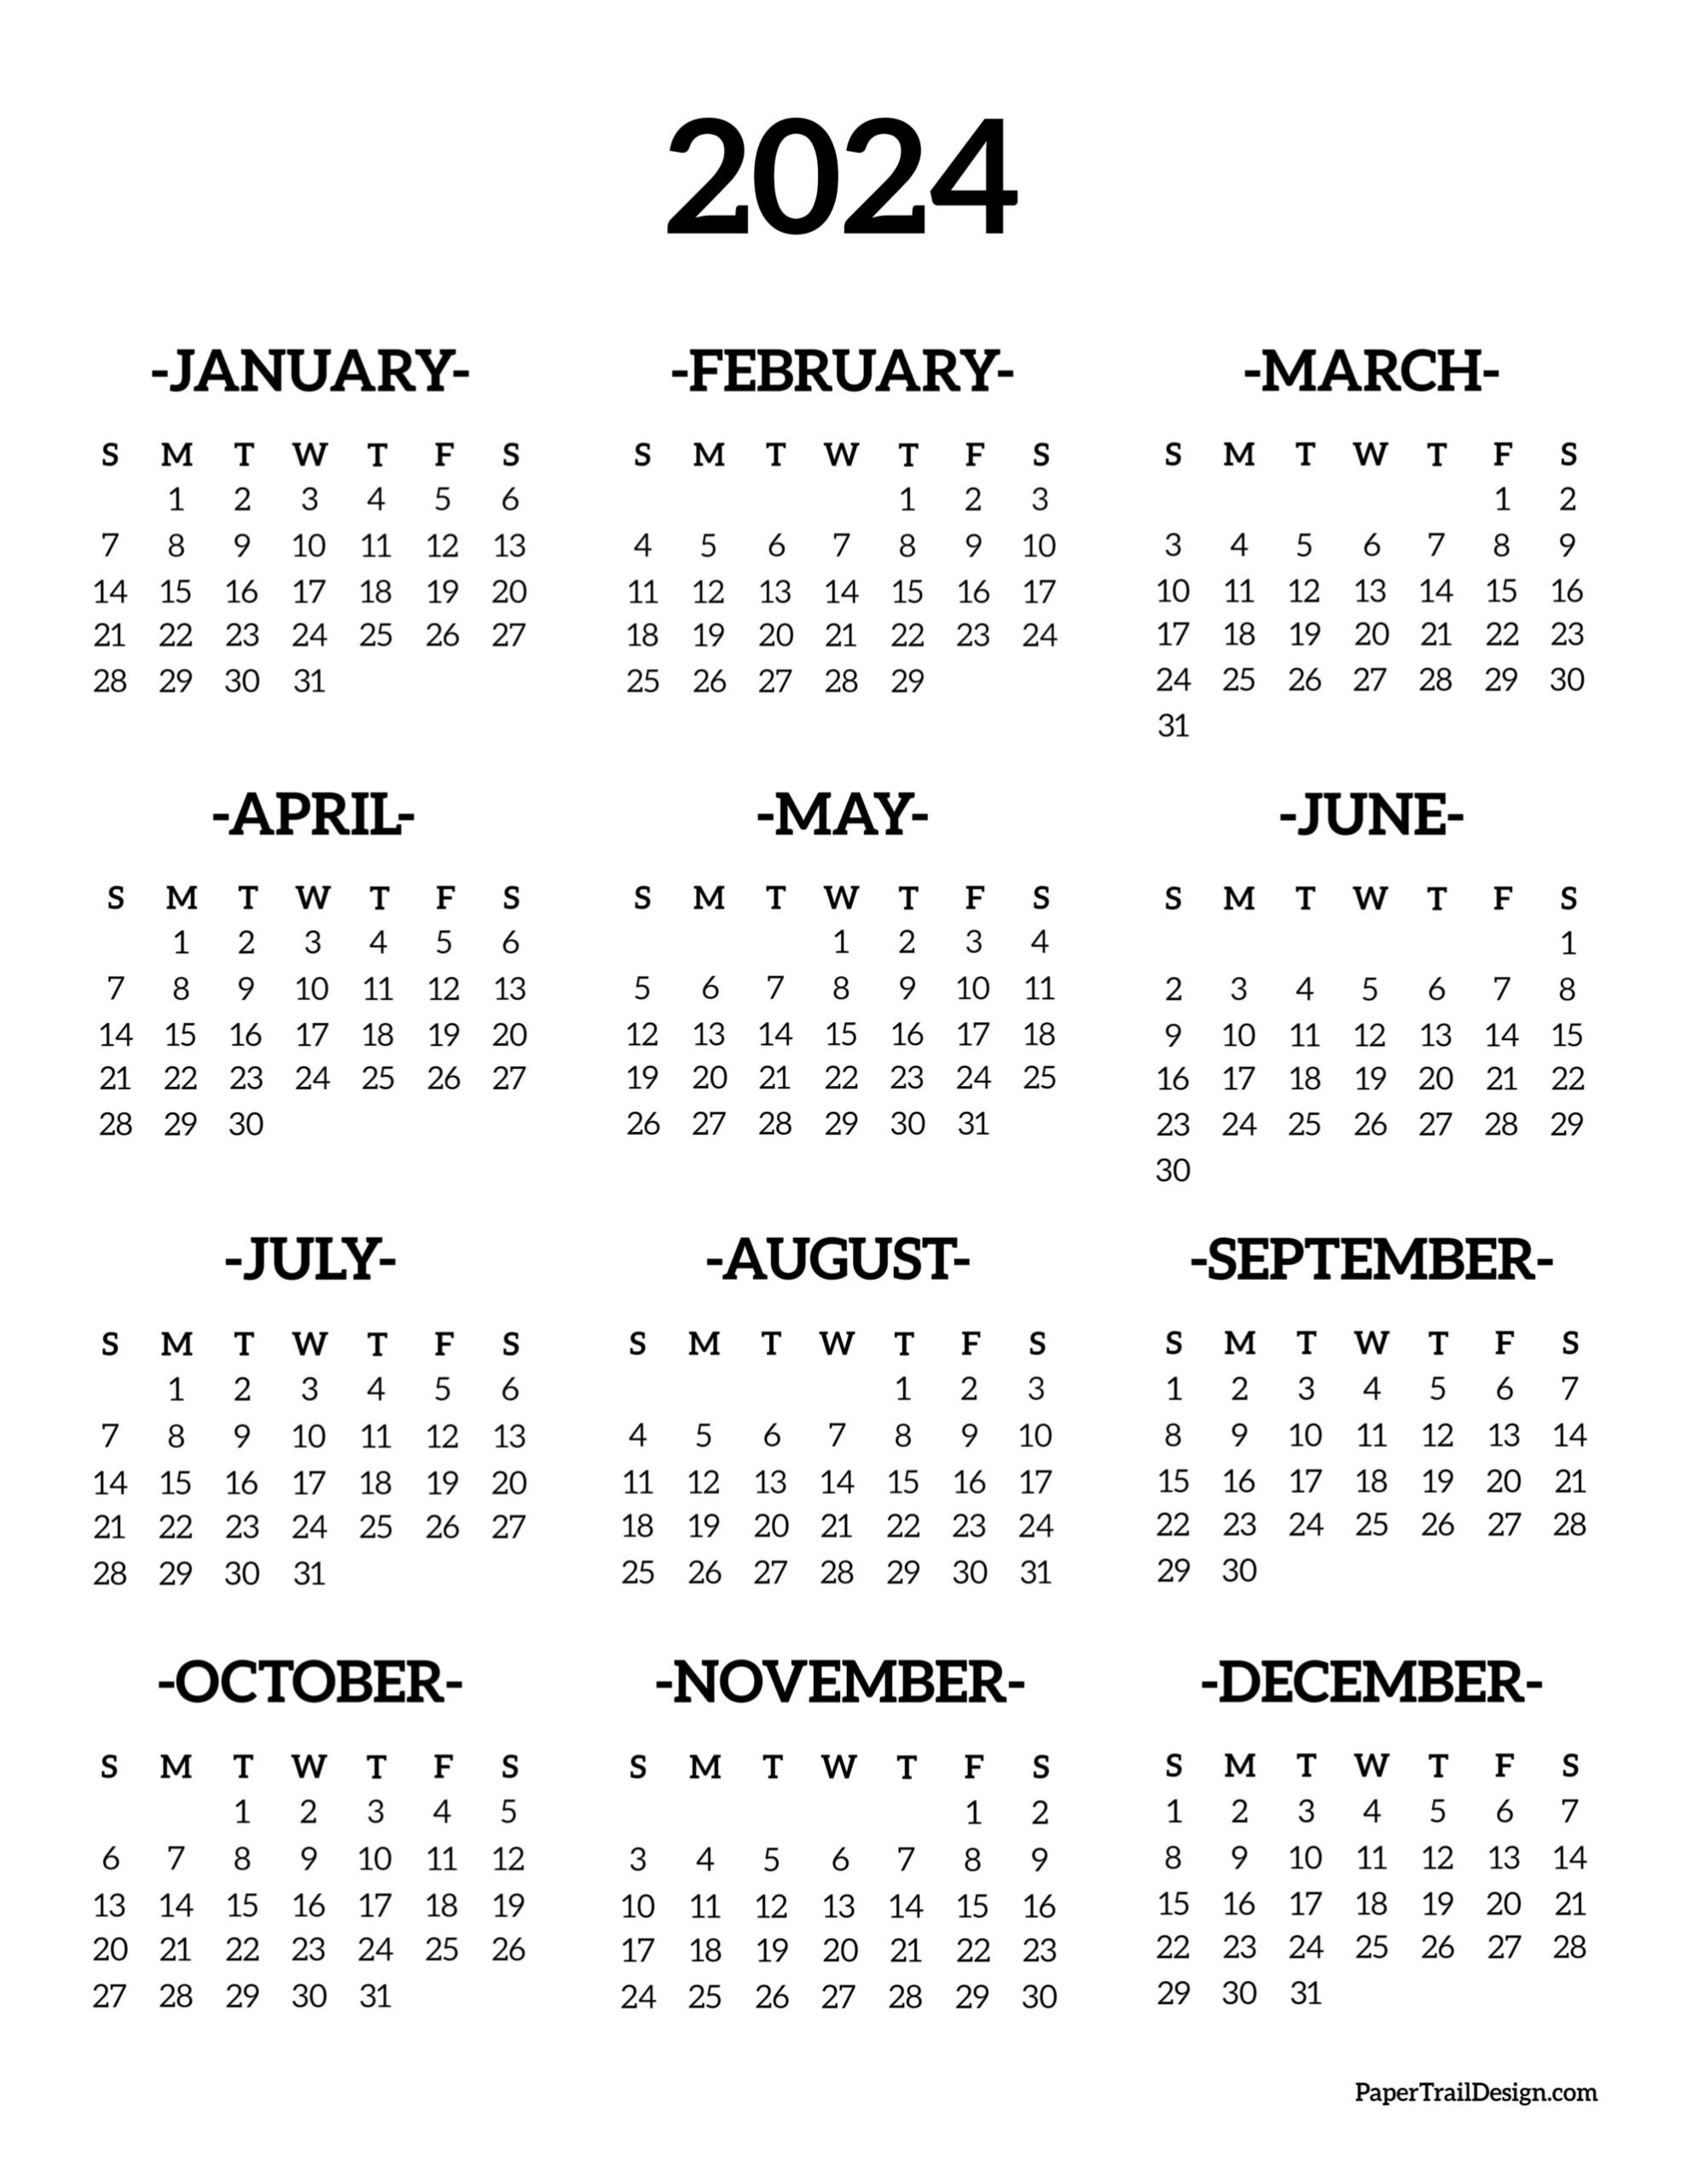 Calendar 2024 Printable One Page - Paper Trail Design | 2024 Annual Calendar One Page